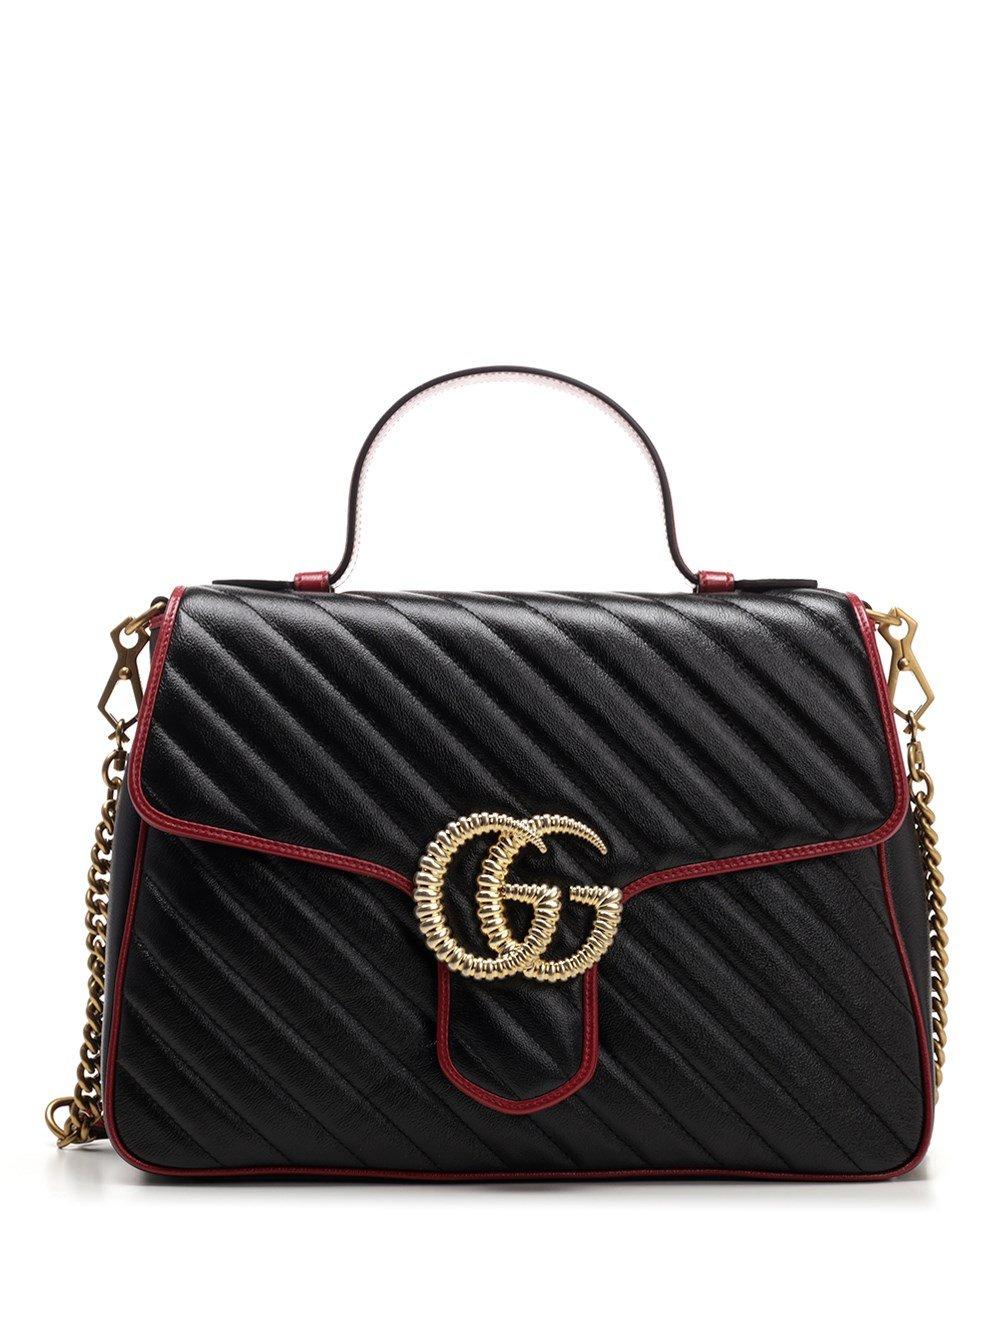 Gucci GG Marmont Medium Top Handle Tote Bag in Black | Lyst